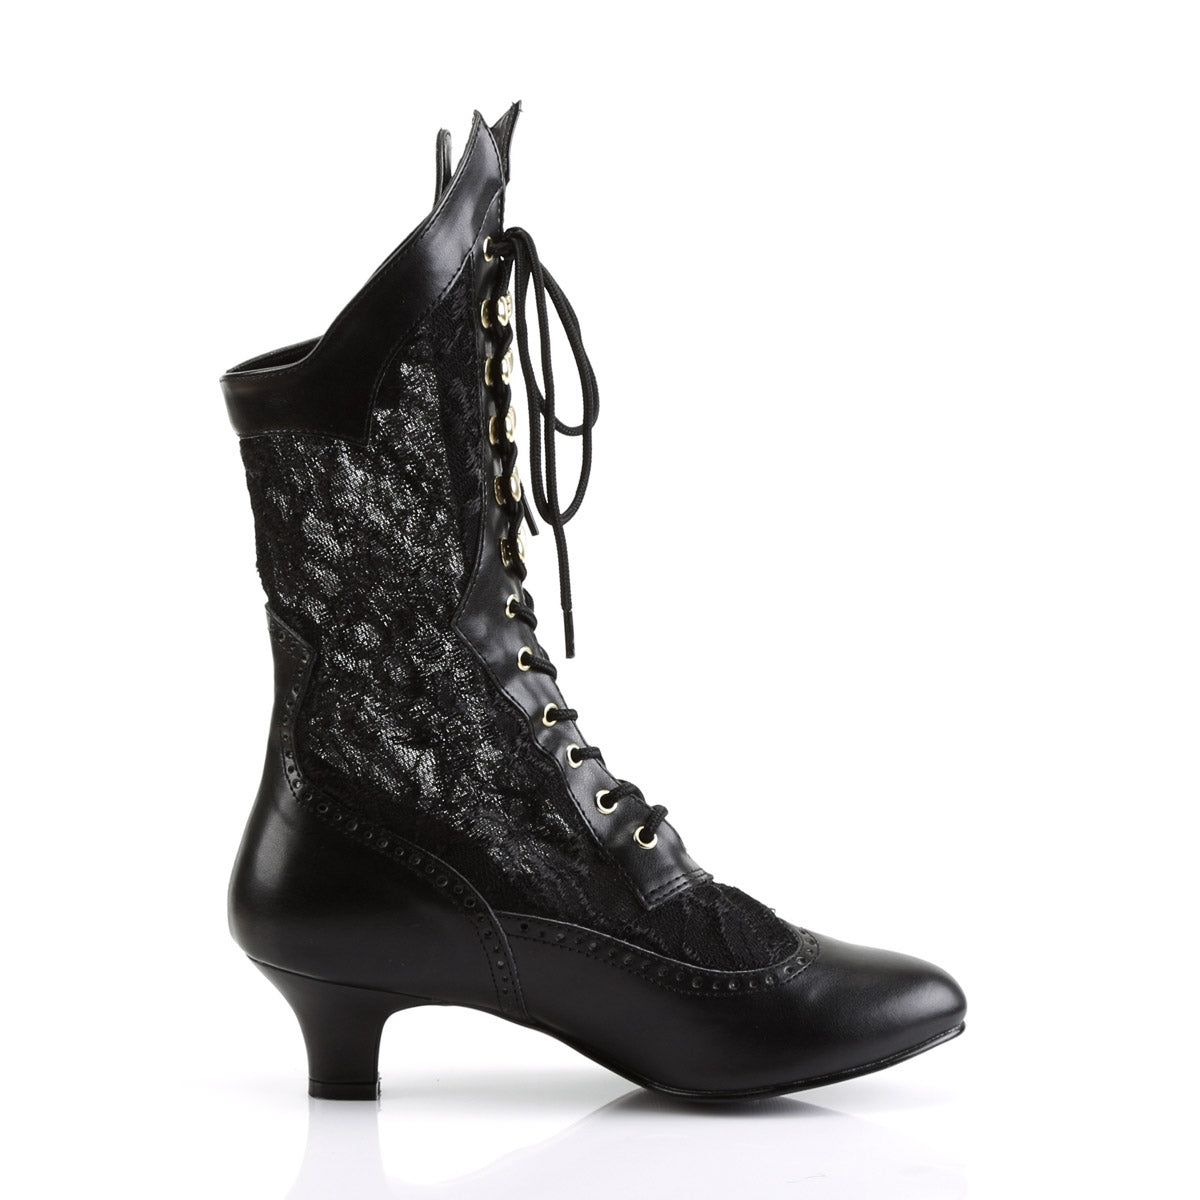 Sexy Lace Victorian Mid Calf Ankle Booties Kitten Heels Boots Shoes Pleaser Funtasma DAME/115